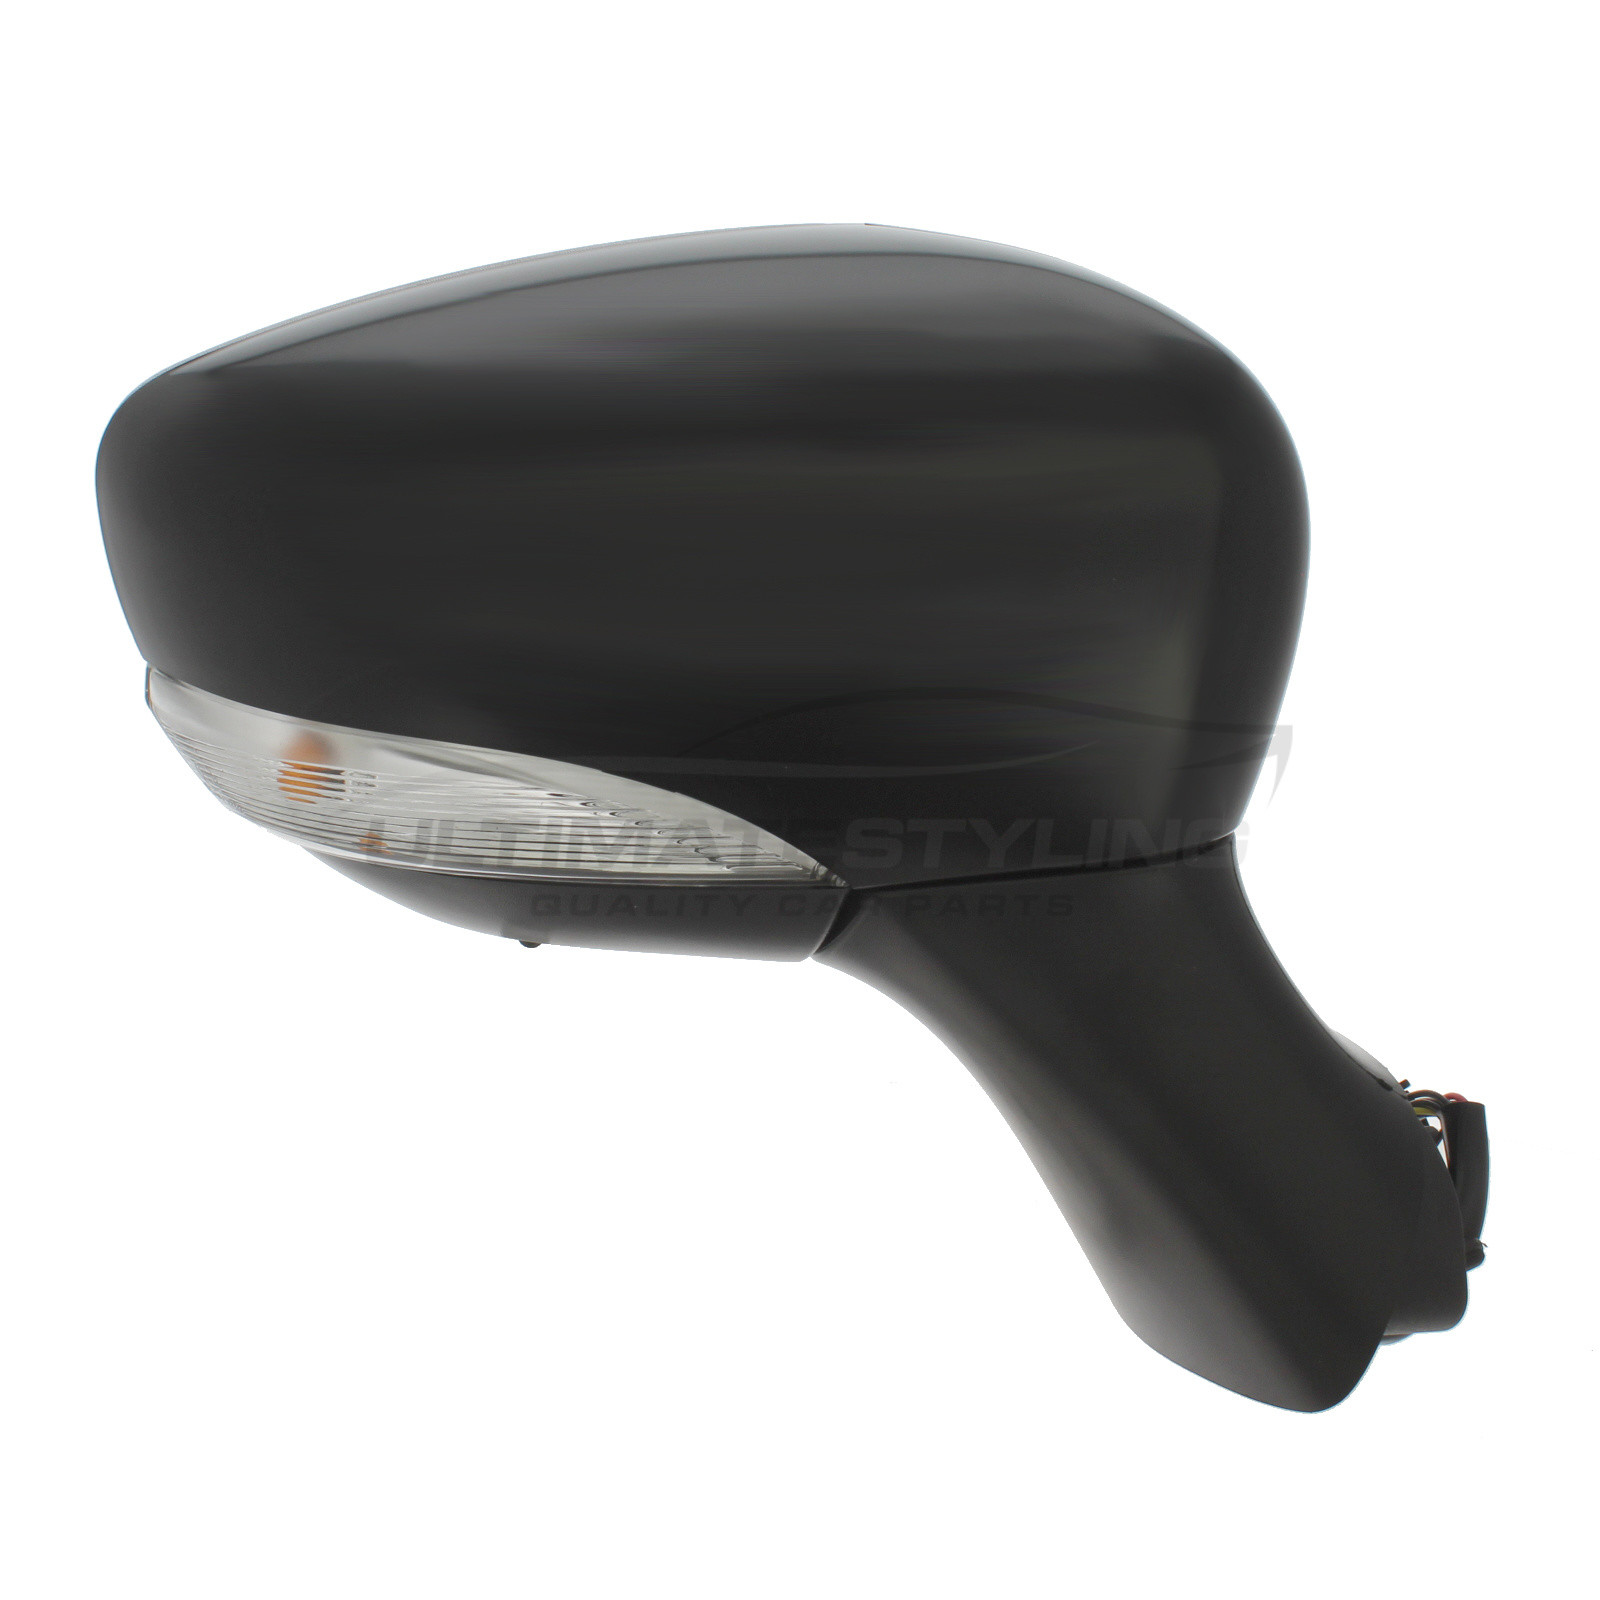 Renault Clio Wing Mirror / Door Mirror - Drivers Side (RH) - Electric adjustment - Heated Glass - Indicator - Temperature Sensor - Polished Black